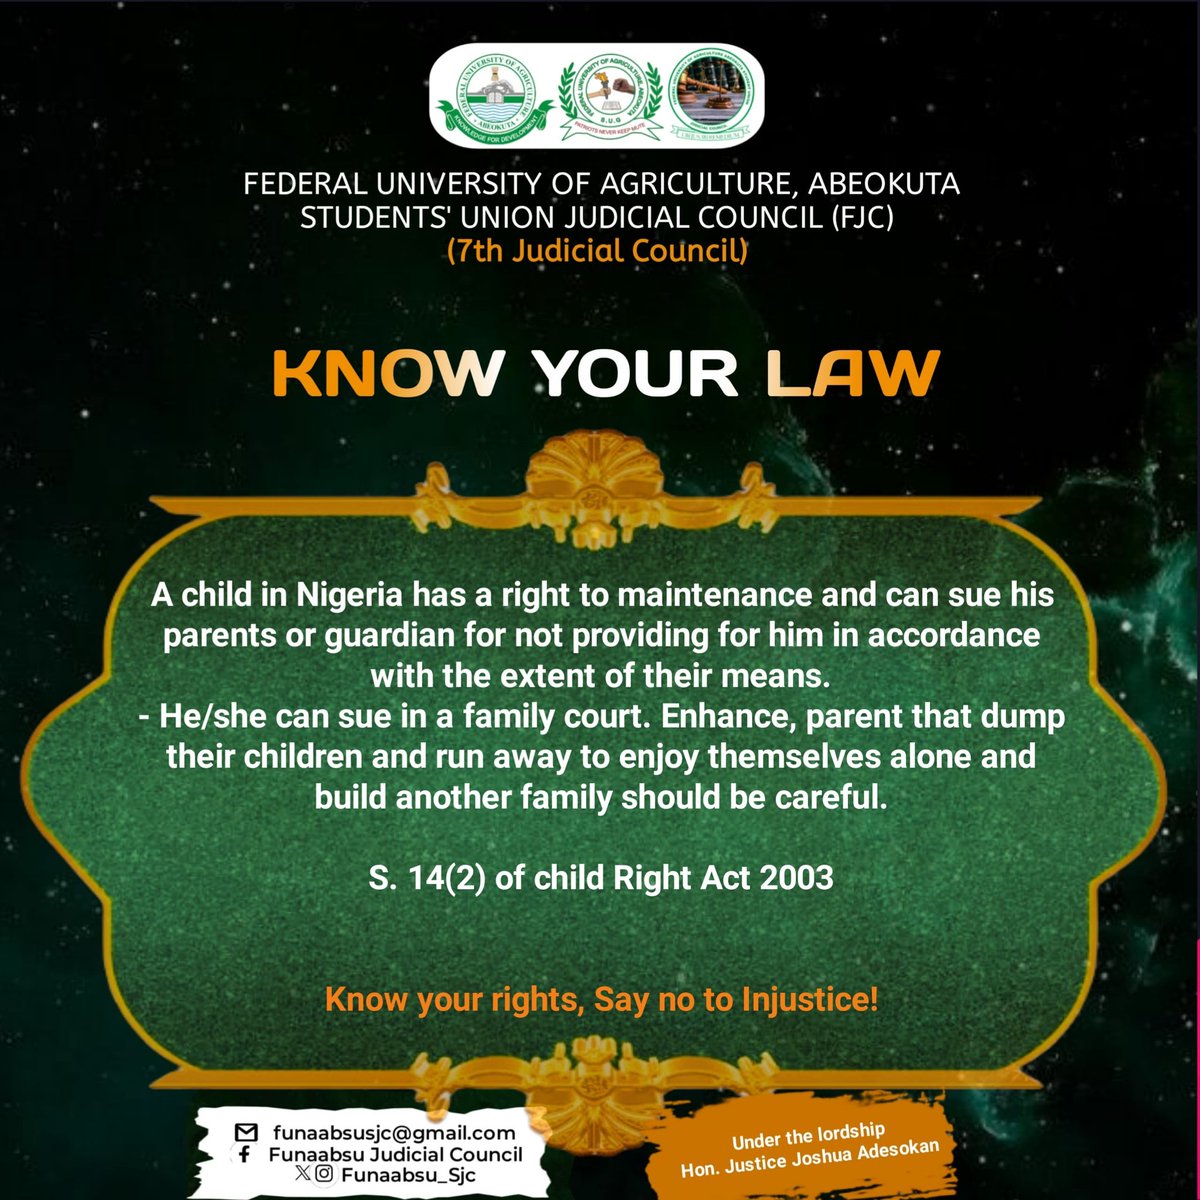 Feeling neglected, abandoned or exasperated? 

Having thought of being properly taken care of by your guardian 🤔

All you have to do is get acquainted with the law that serves as your legal backing.
#KnowYourLaw
#FUNAABSUConstitution
#FUNAABSU23/24
#TeamUbuntu